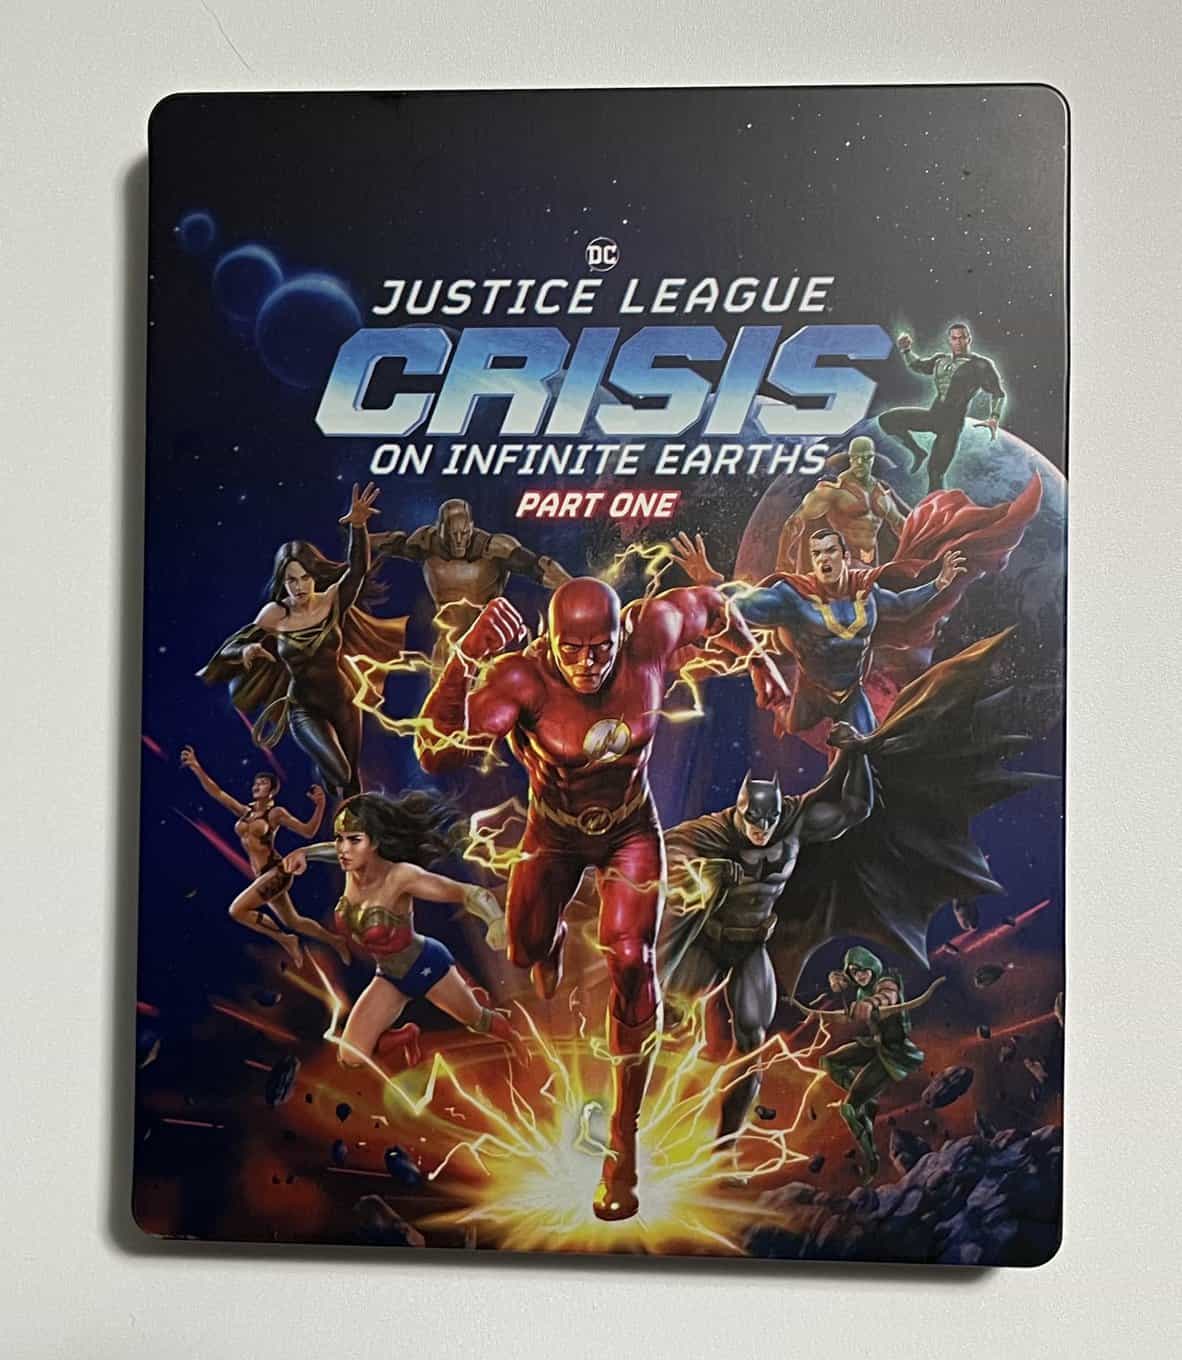 4K Blu-ray Review: Justice League: Crisis on Infinite Earths